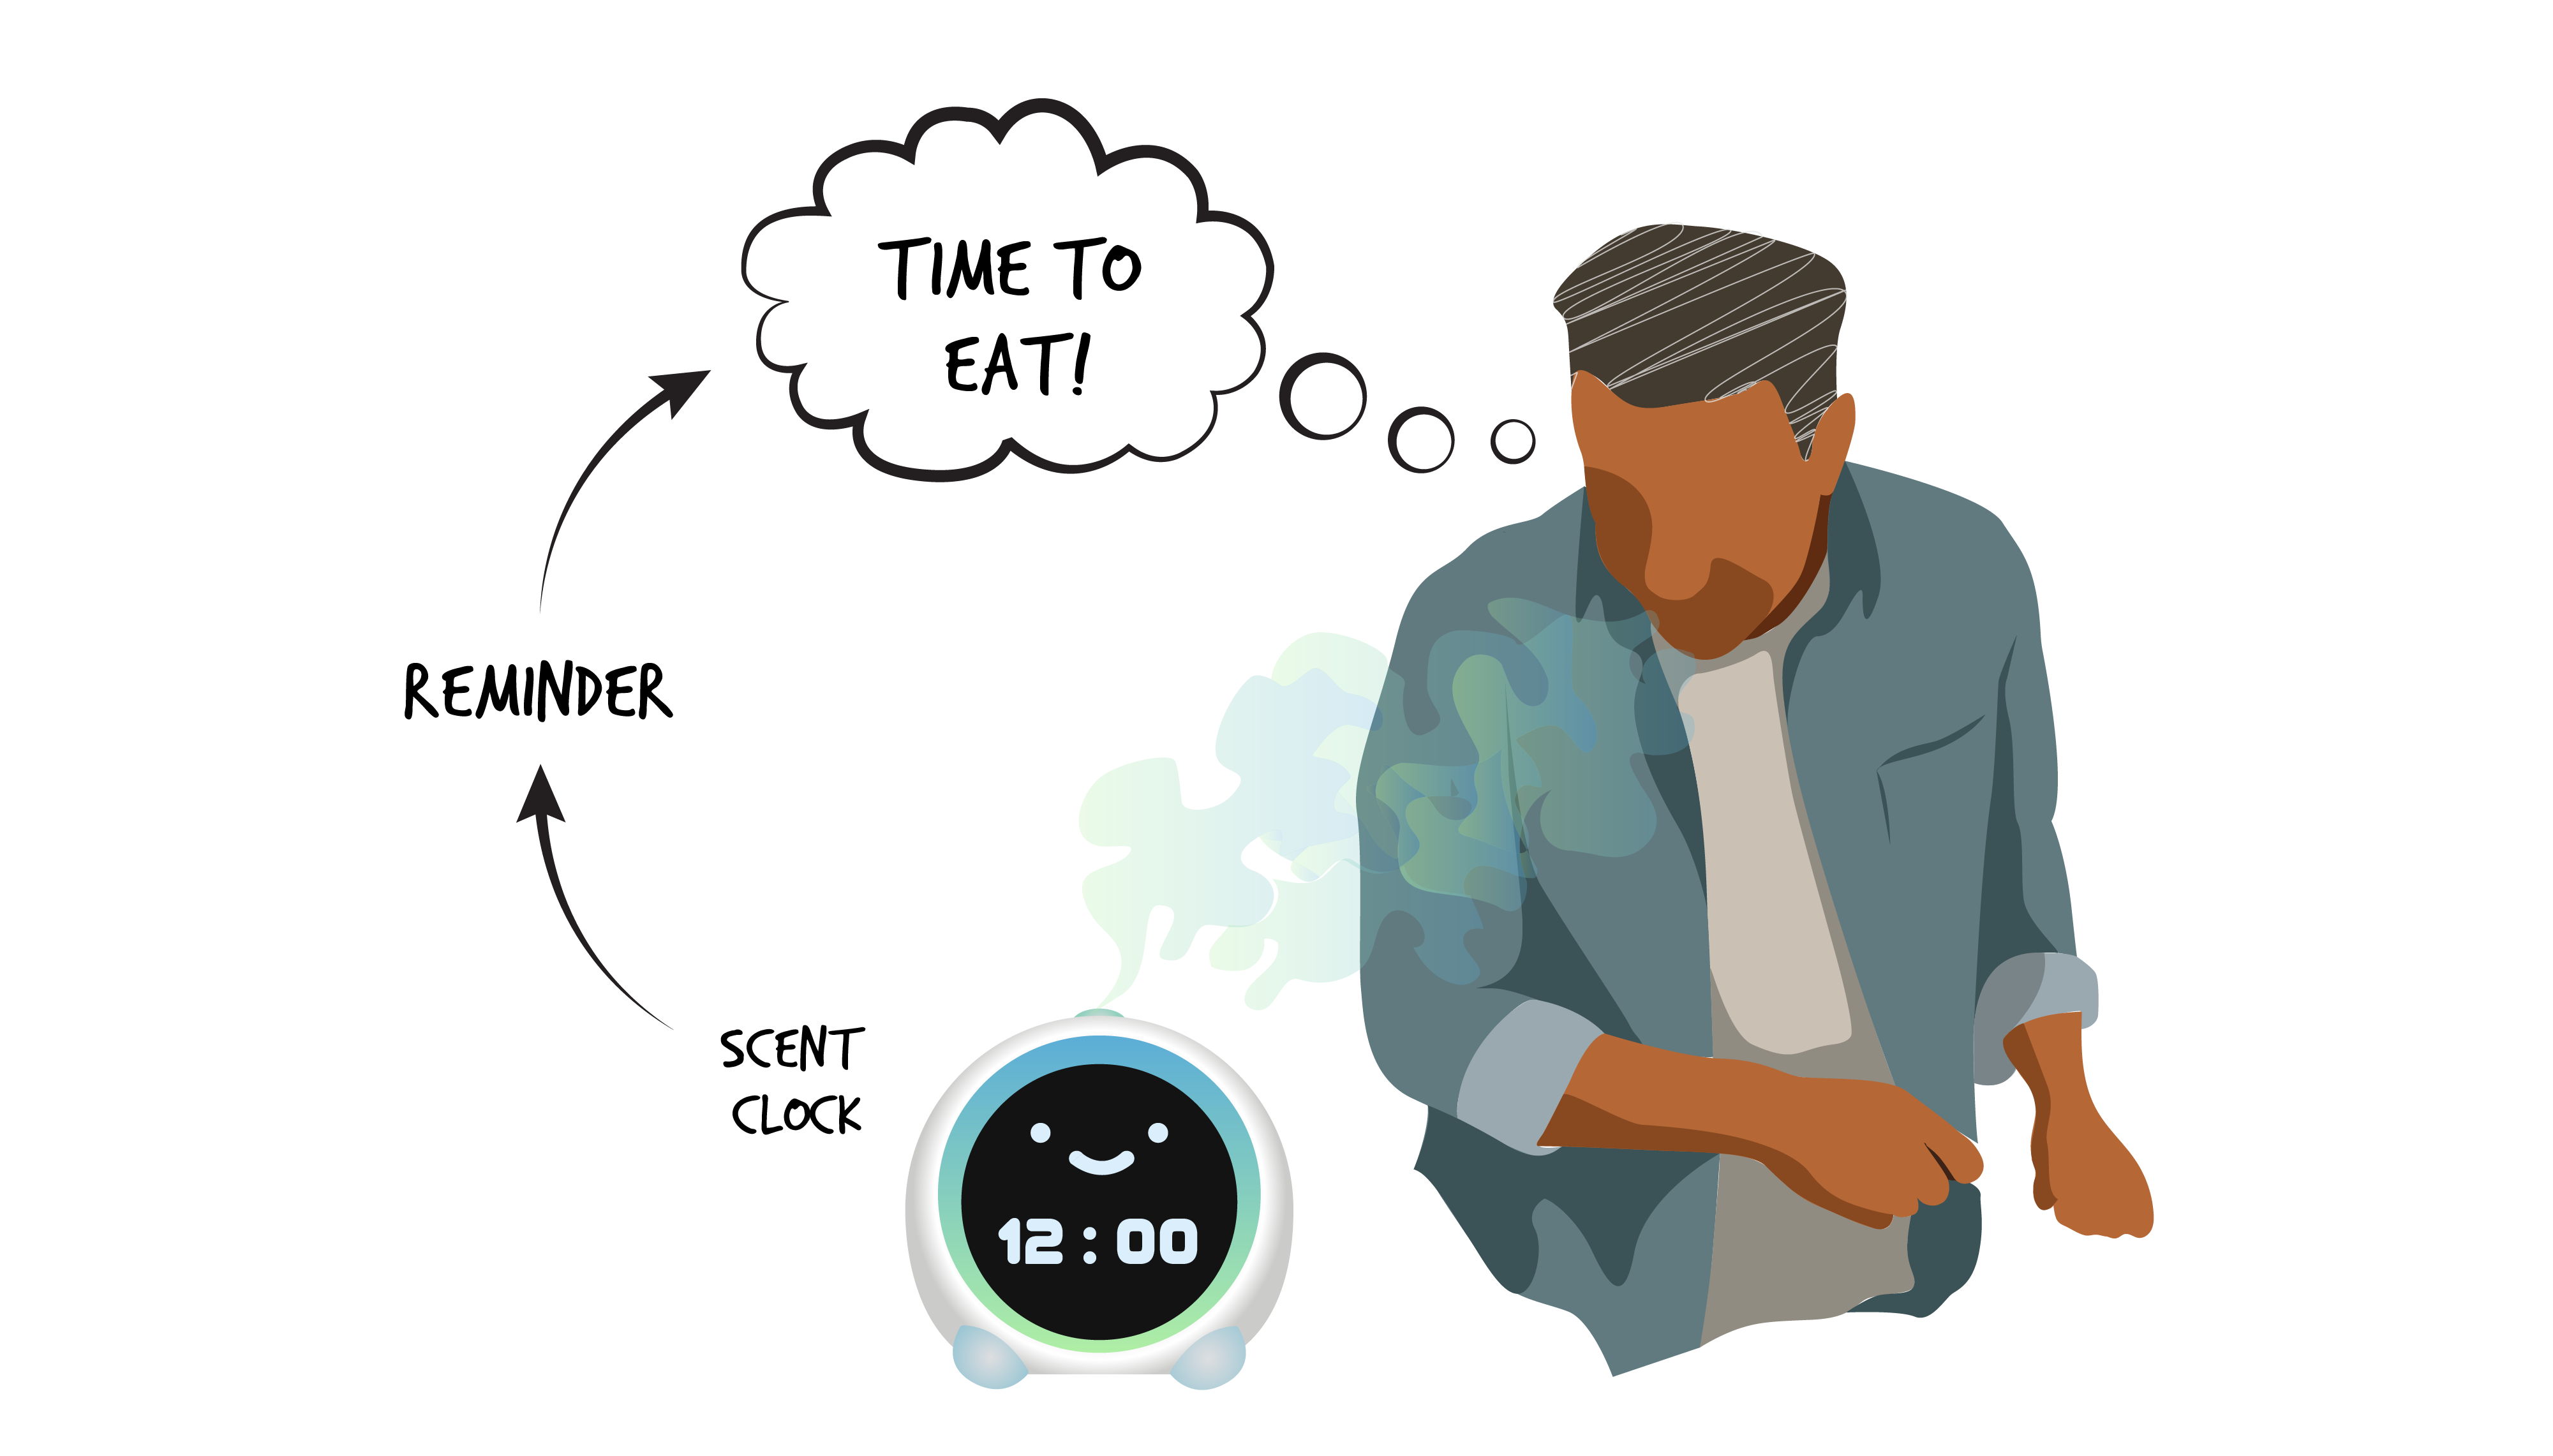 Person with short, black hair and is in white shirt facing a sliver time clock with two brown clouds coming out (one brown darker than the other). The clock shows time 12:35 and has text smell emitting clock with an arrow pointing to it. Thought bubble coming out from person&#039;s head with text time to eat! inside, and text reminder with arrow pointing to it.